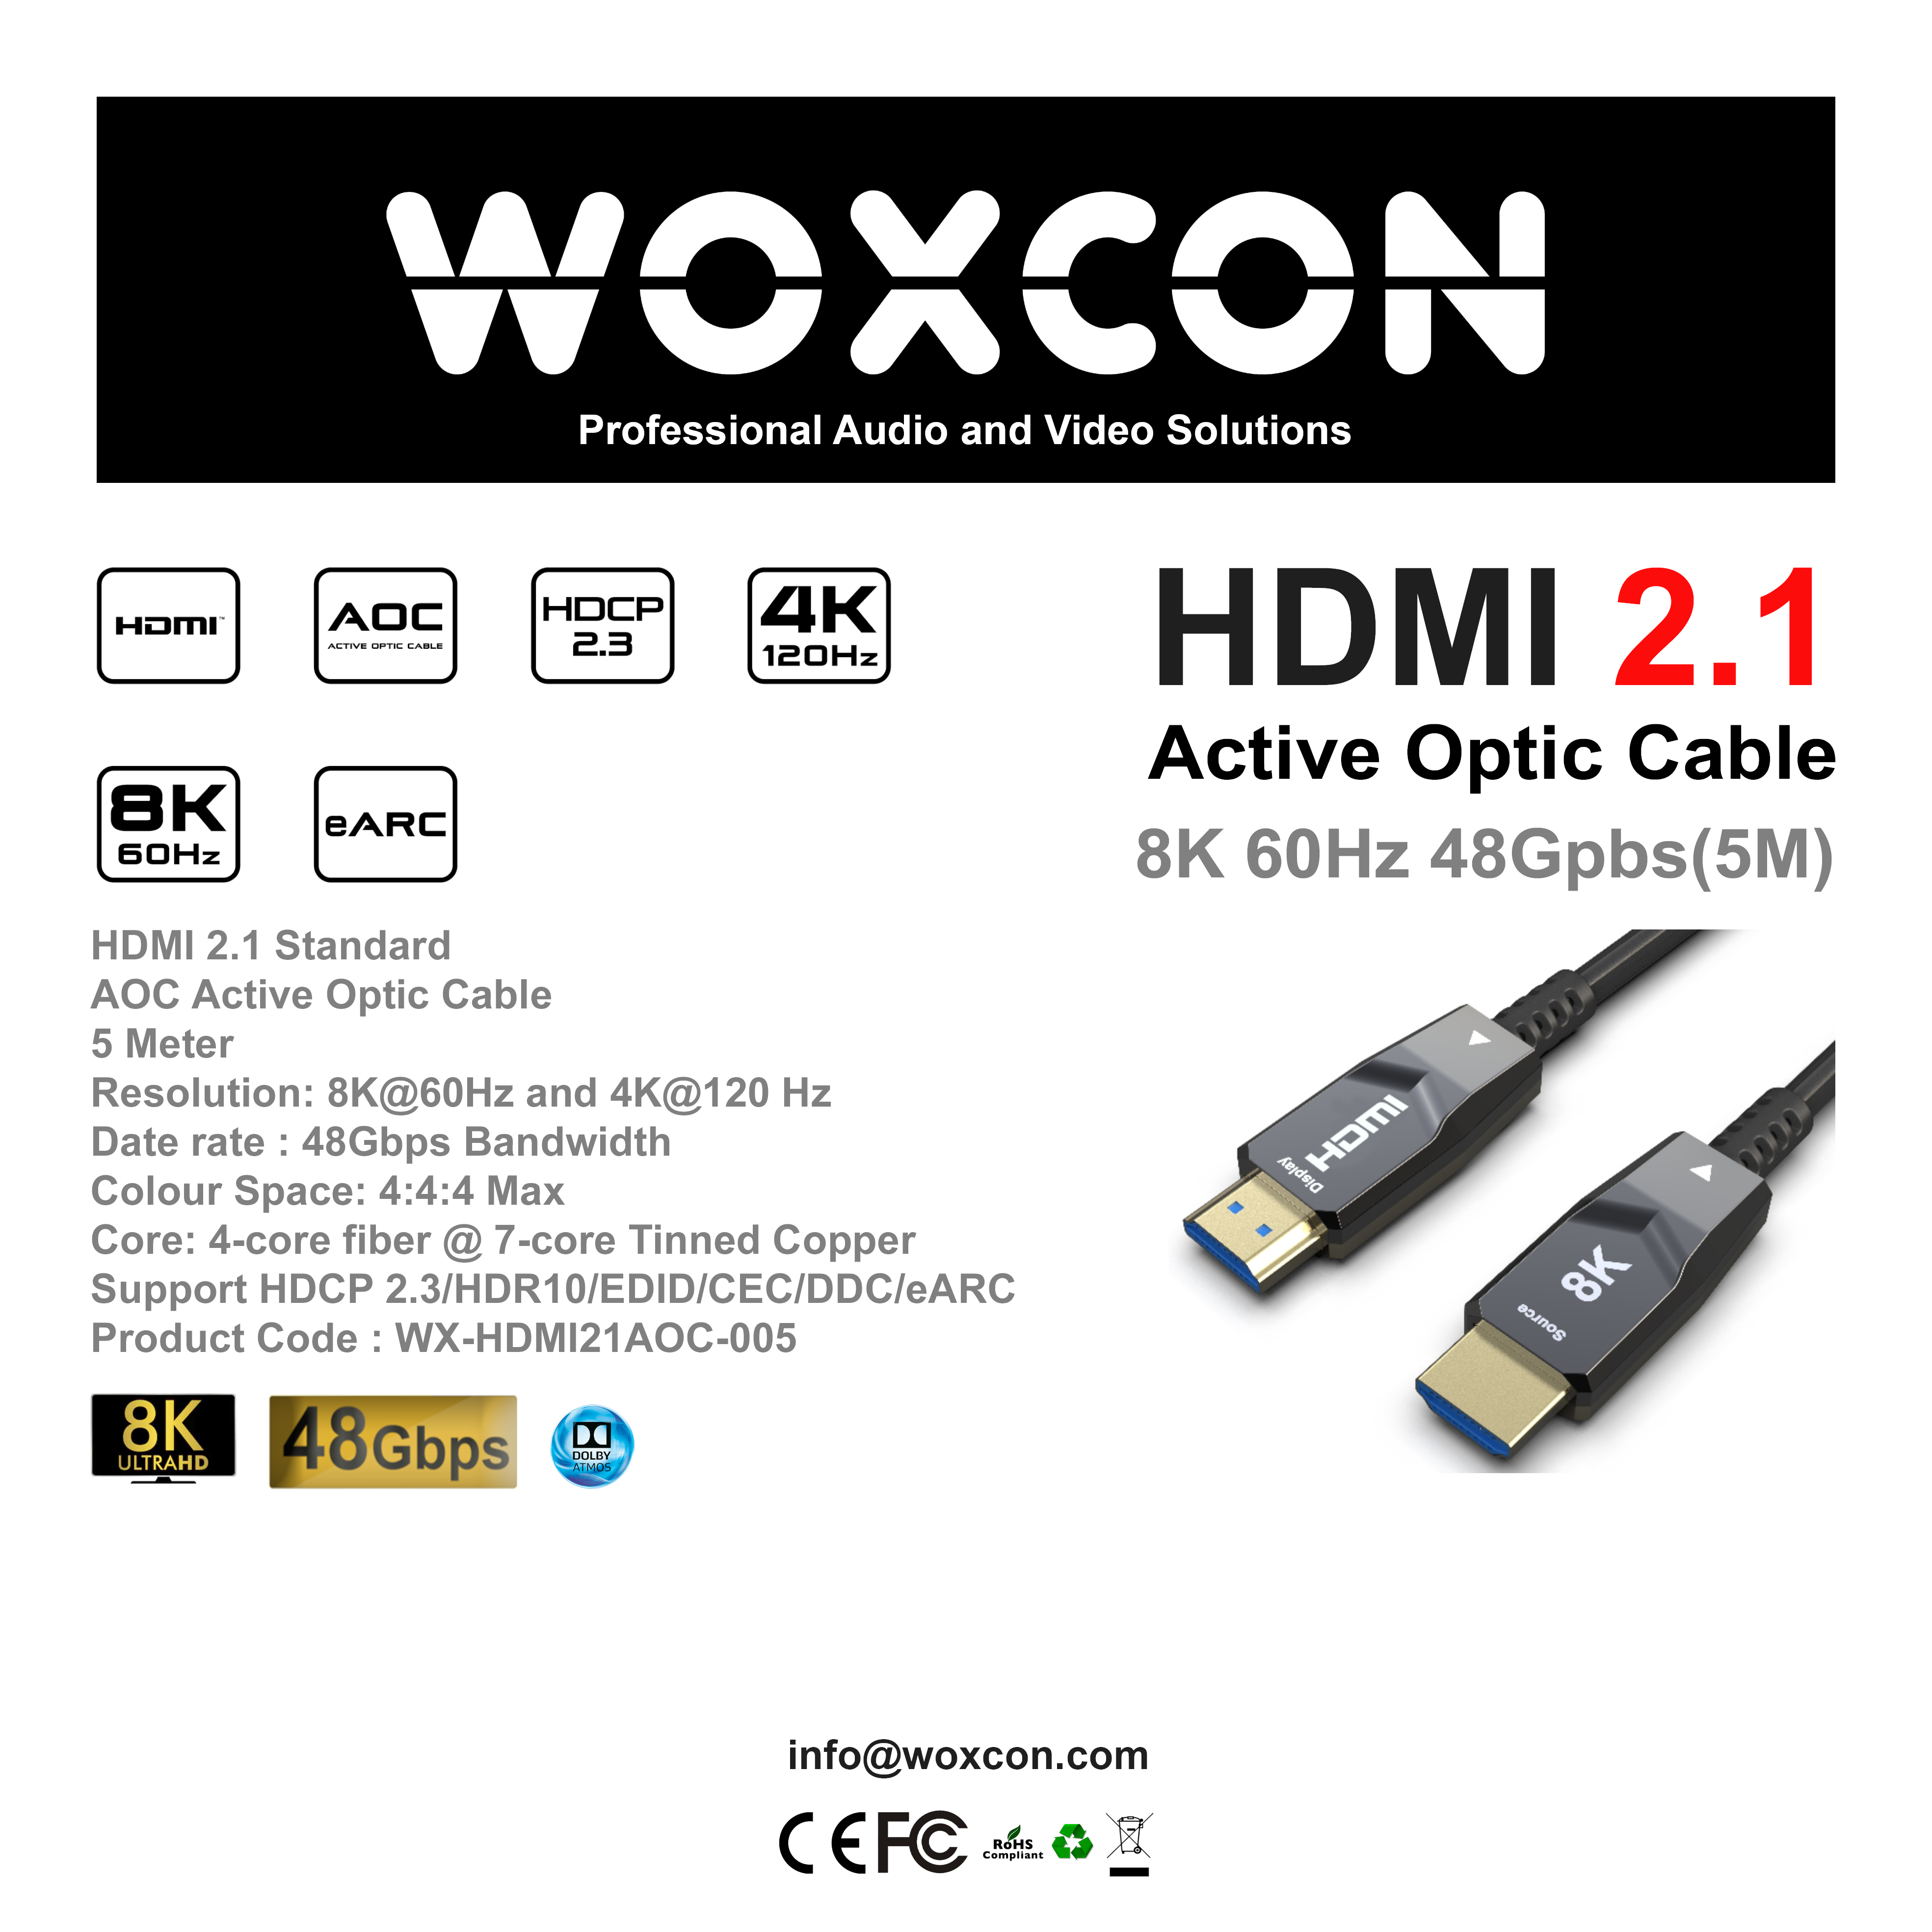 HDMI 2.1 Hybrid Active Optic Cable 8K supported 5 mt